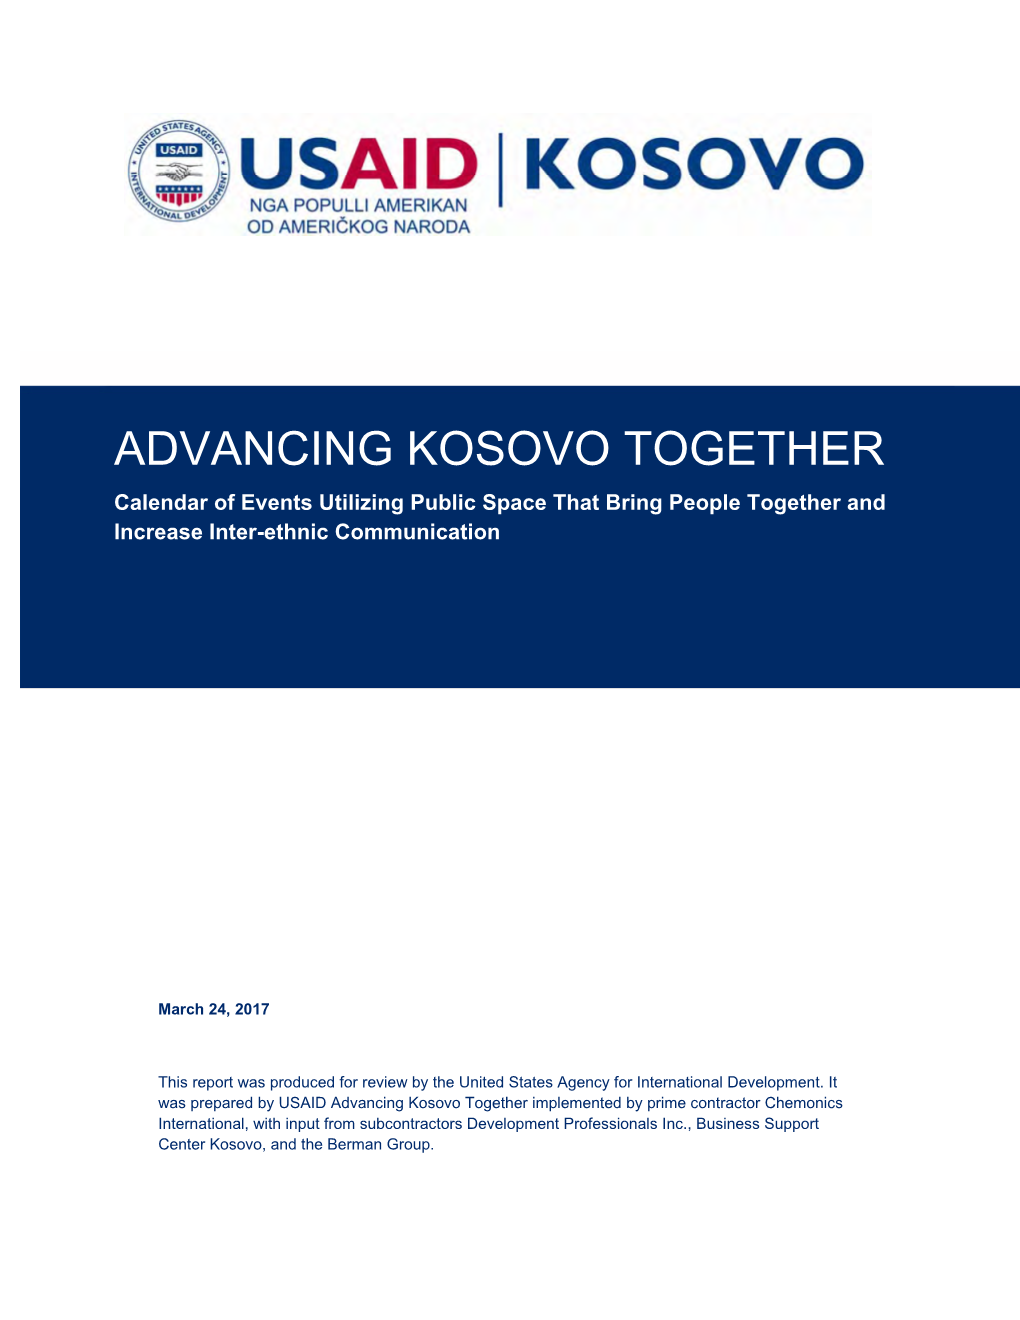 ADVANCING KOSOVO TOGETHER Calendar of Events Utilizing Public Space That Bring People Together and Increase Inter-Ethnic Communication